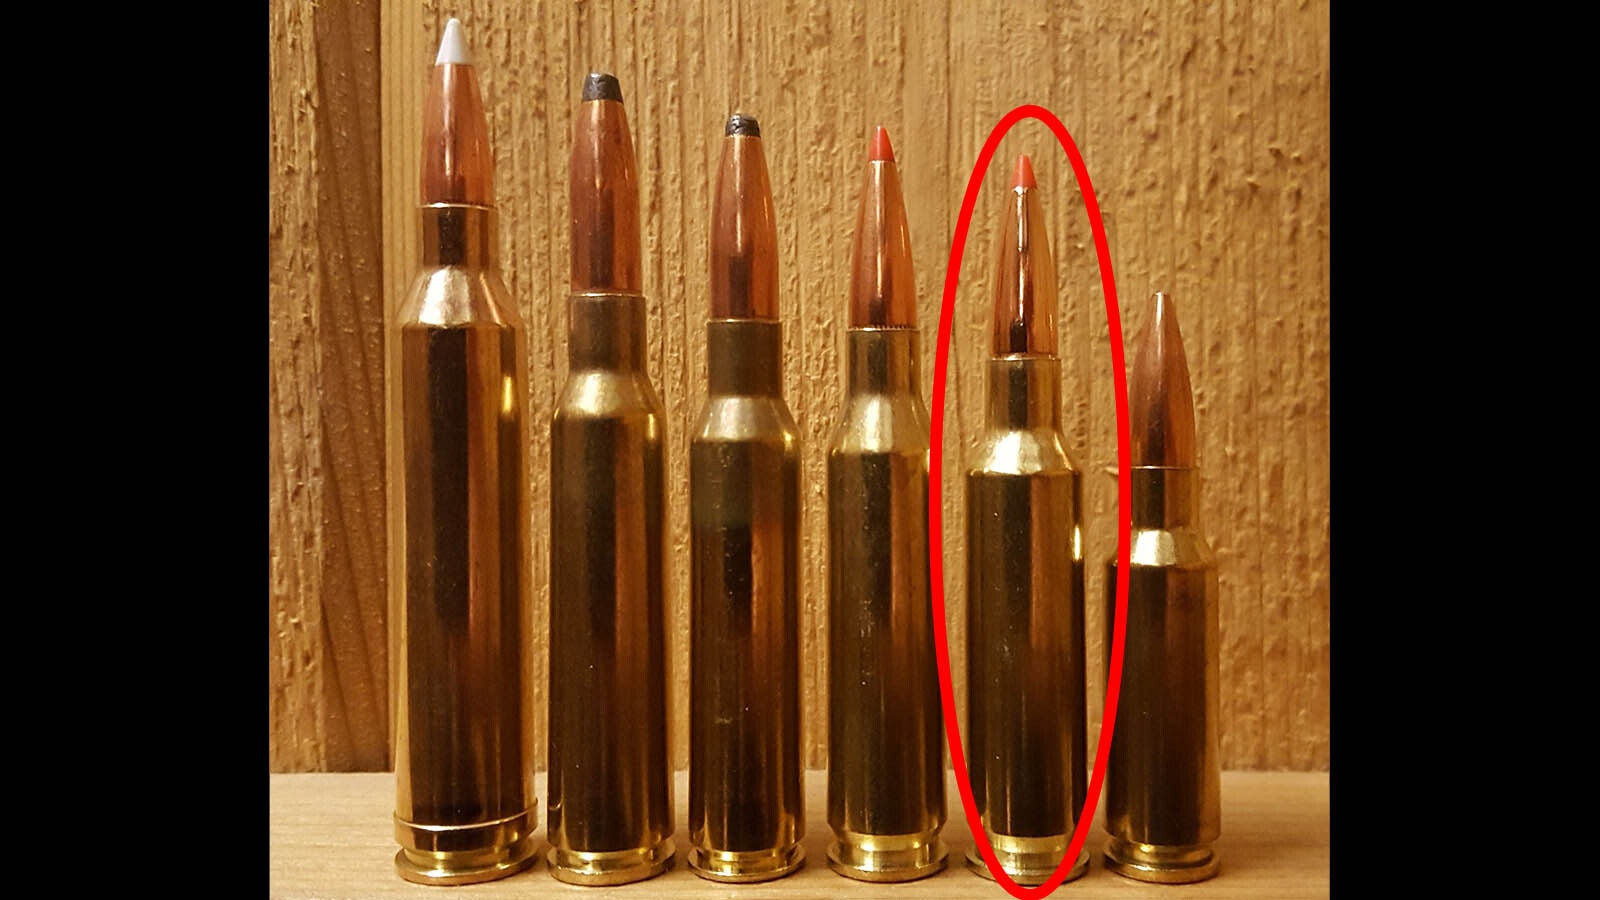 Size comparison of some 6.5mm cartridges, from left: .264 Winchester Magnum, 6.5×55mm Swedish, 6.5×52mm Carcano, .260 Remington, 6.5mm Creedmoor and 6.5mm Grendel.